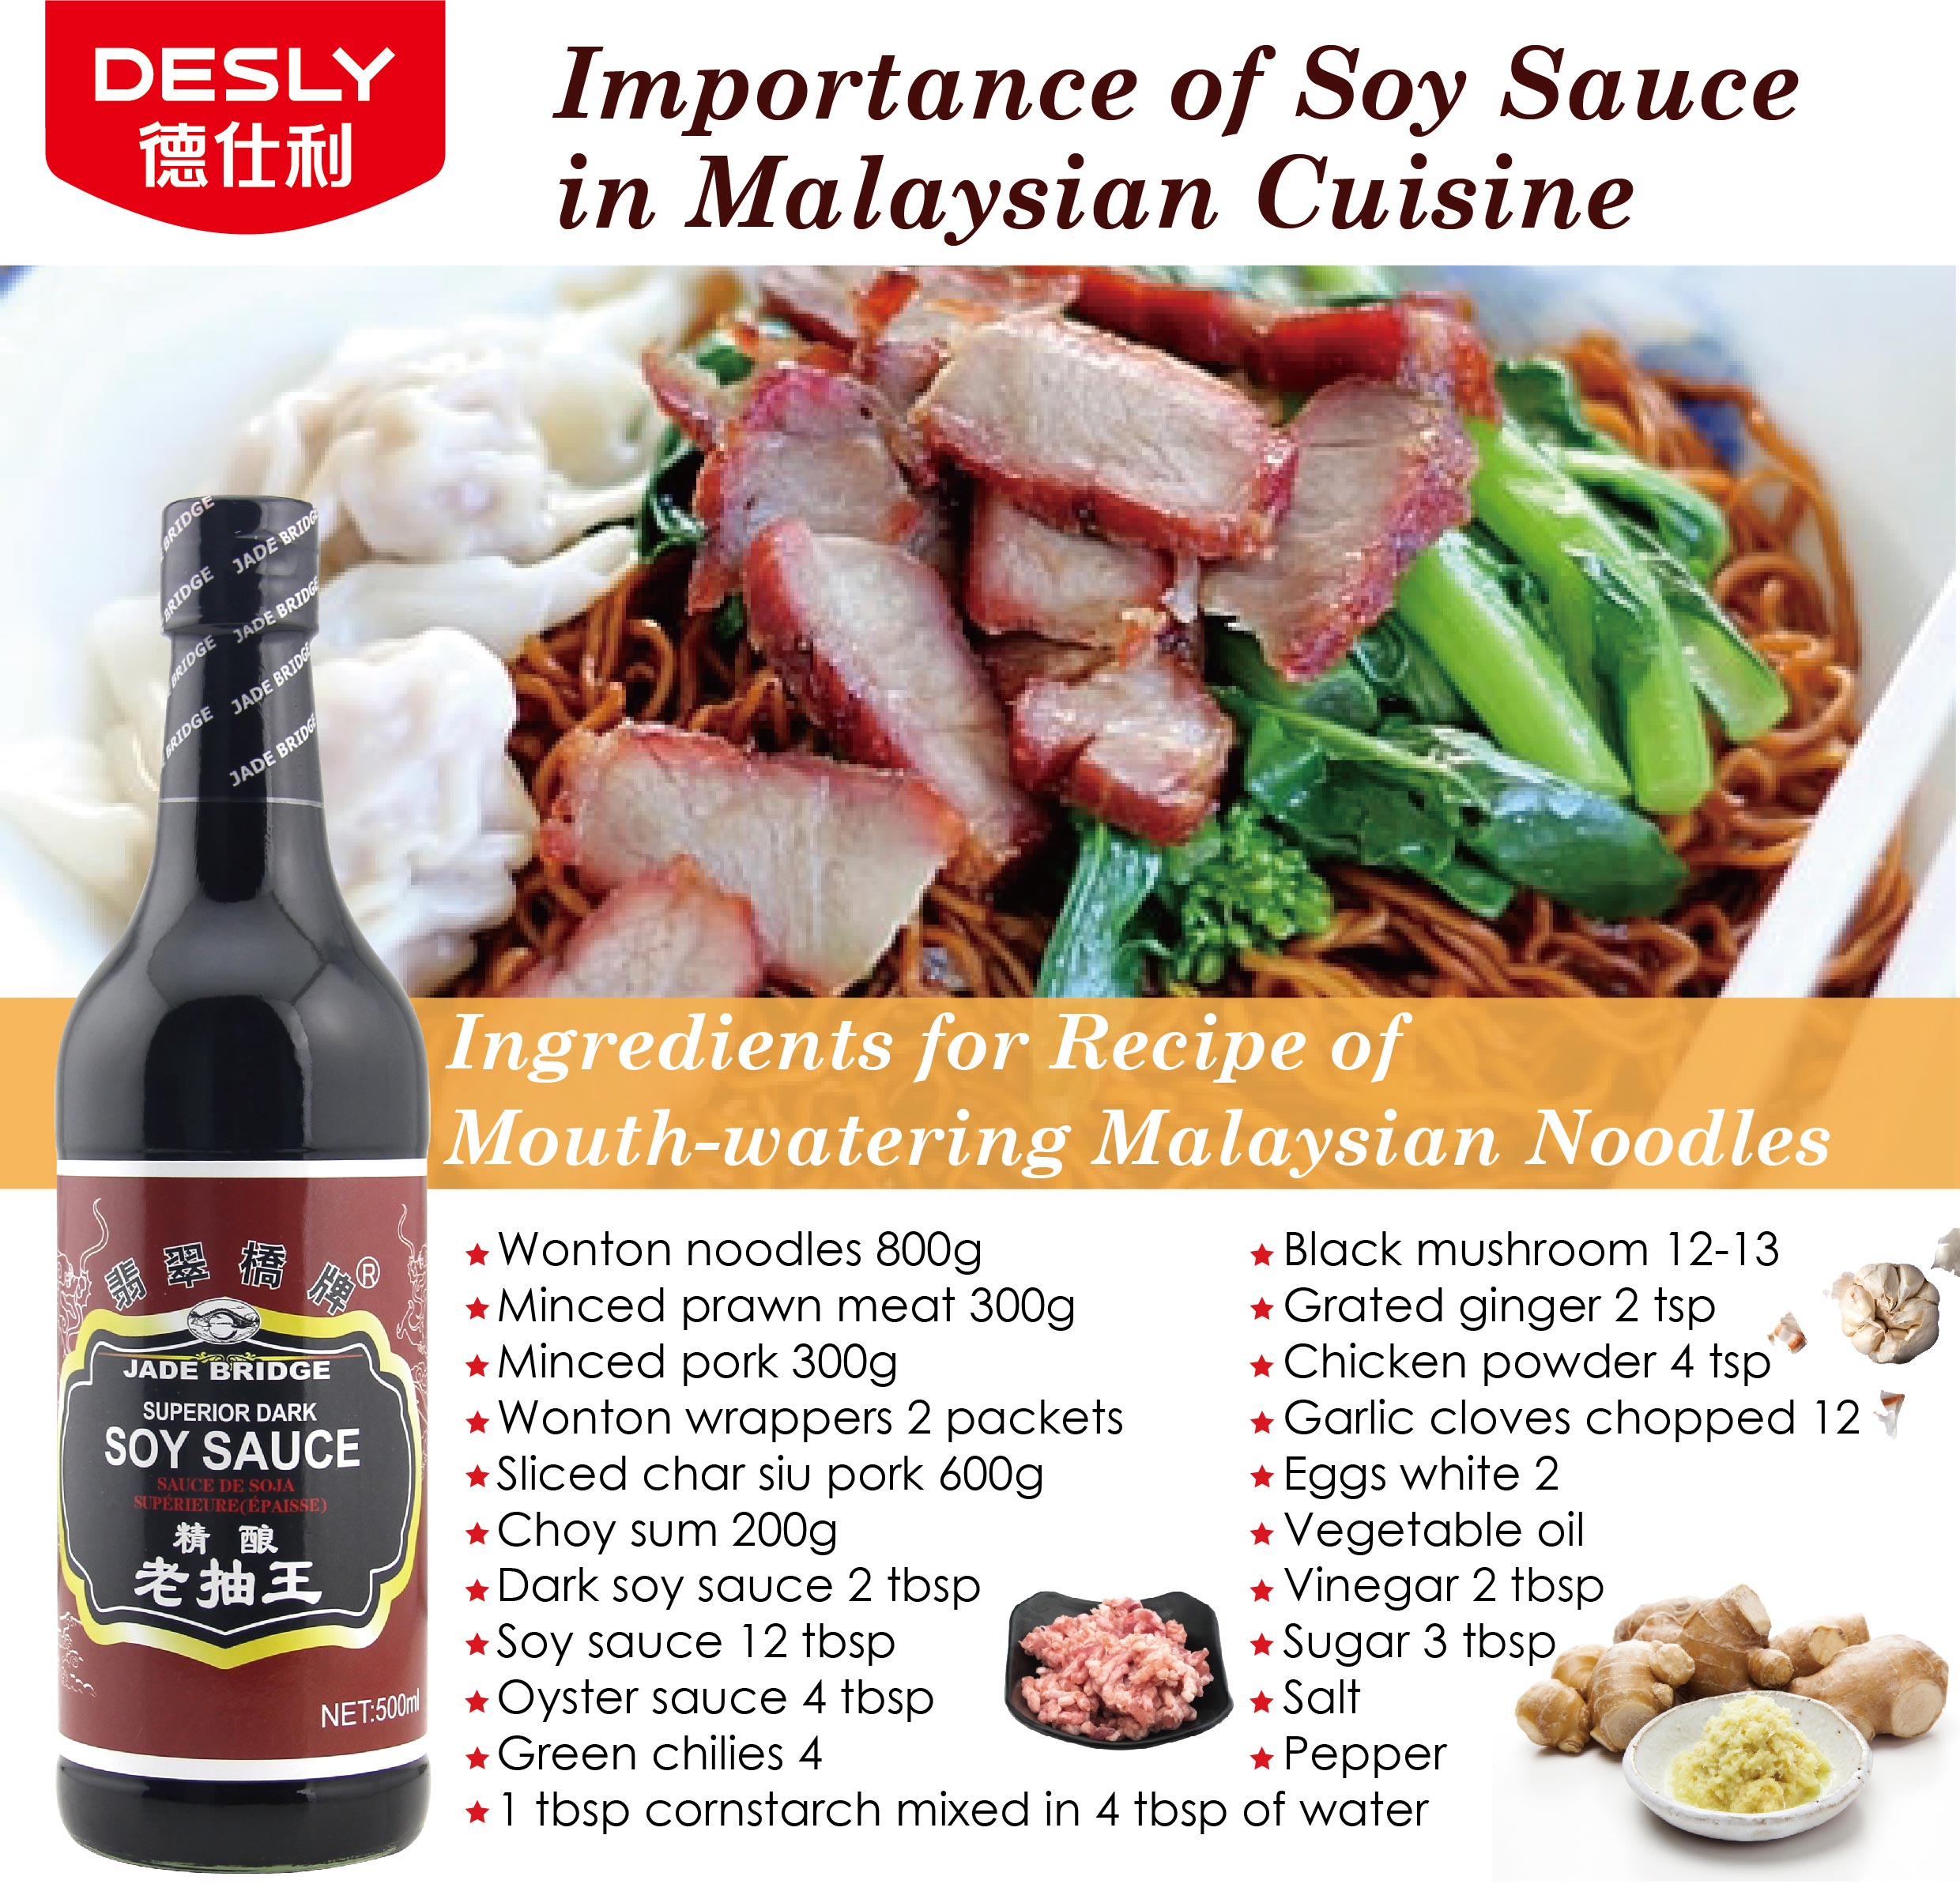 Importance-of-Soy-Sauce-in-Malaysian-Cuisine-copy-02.jpg